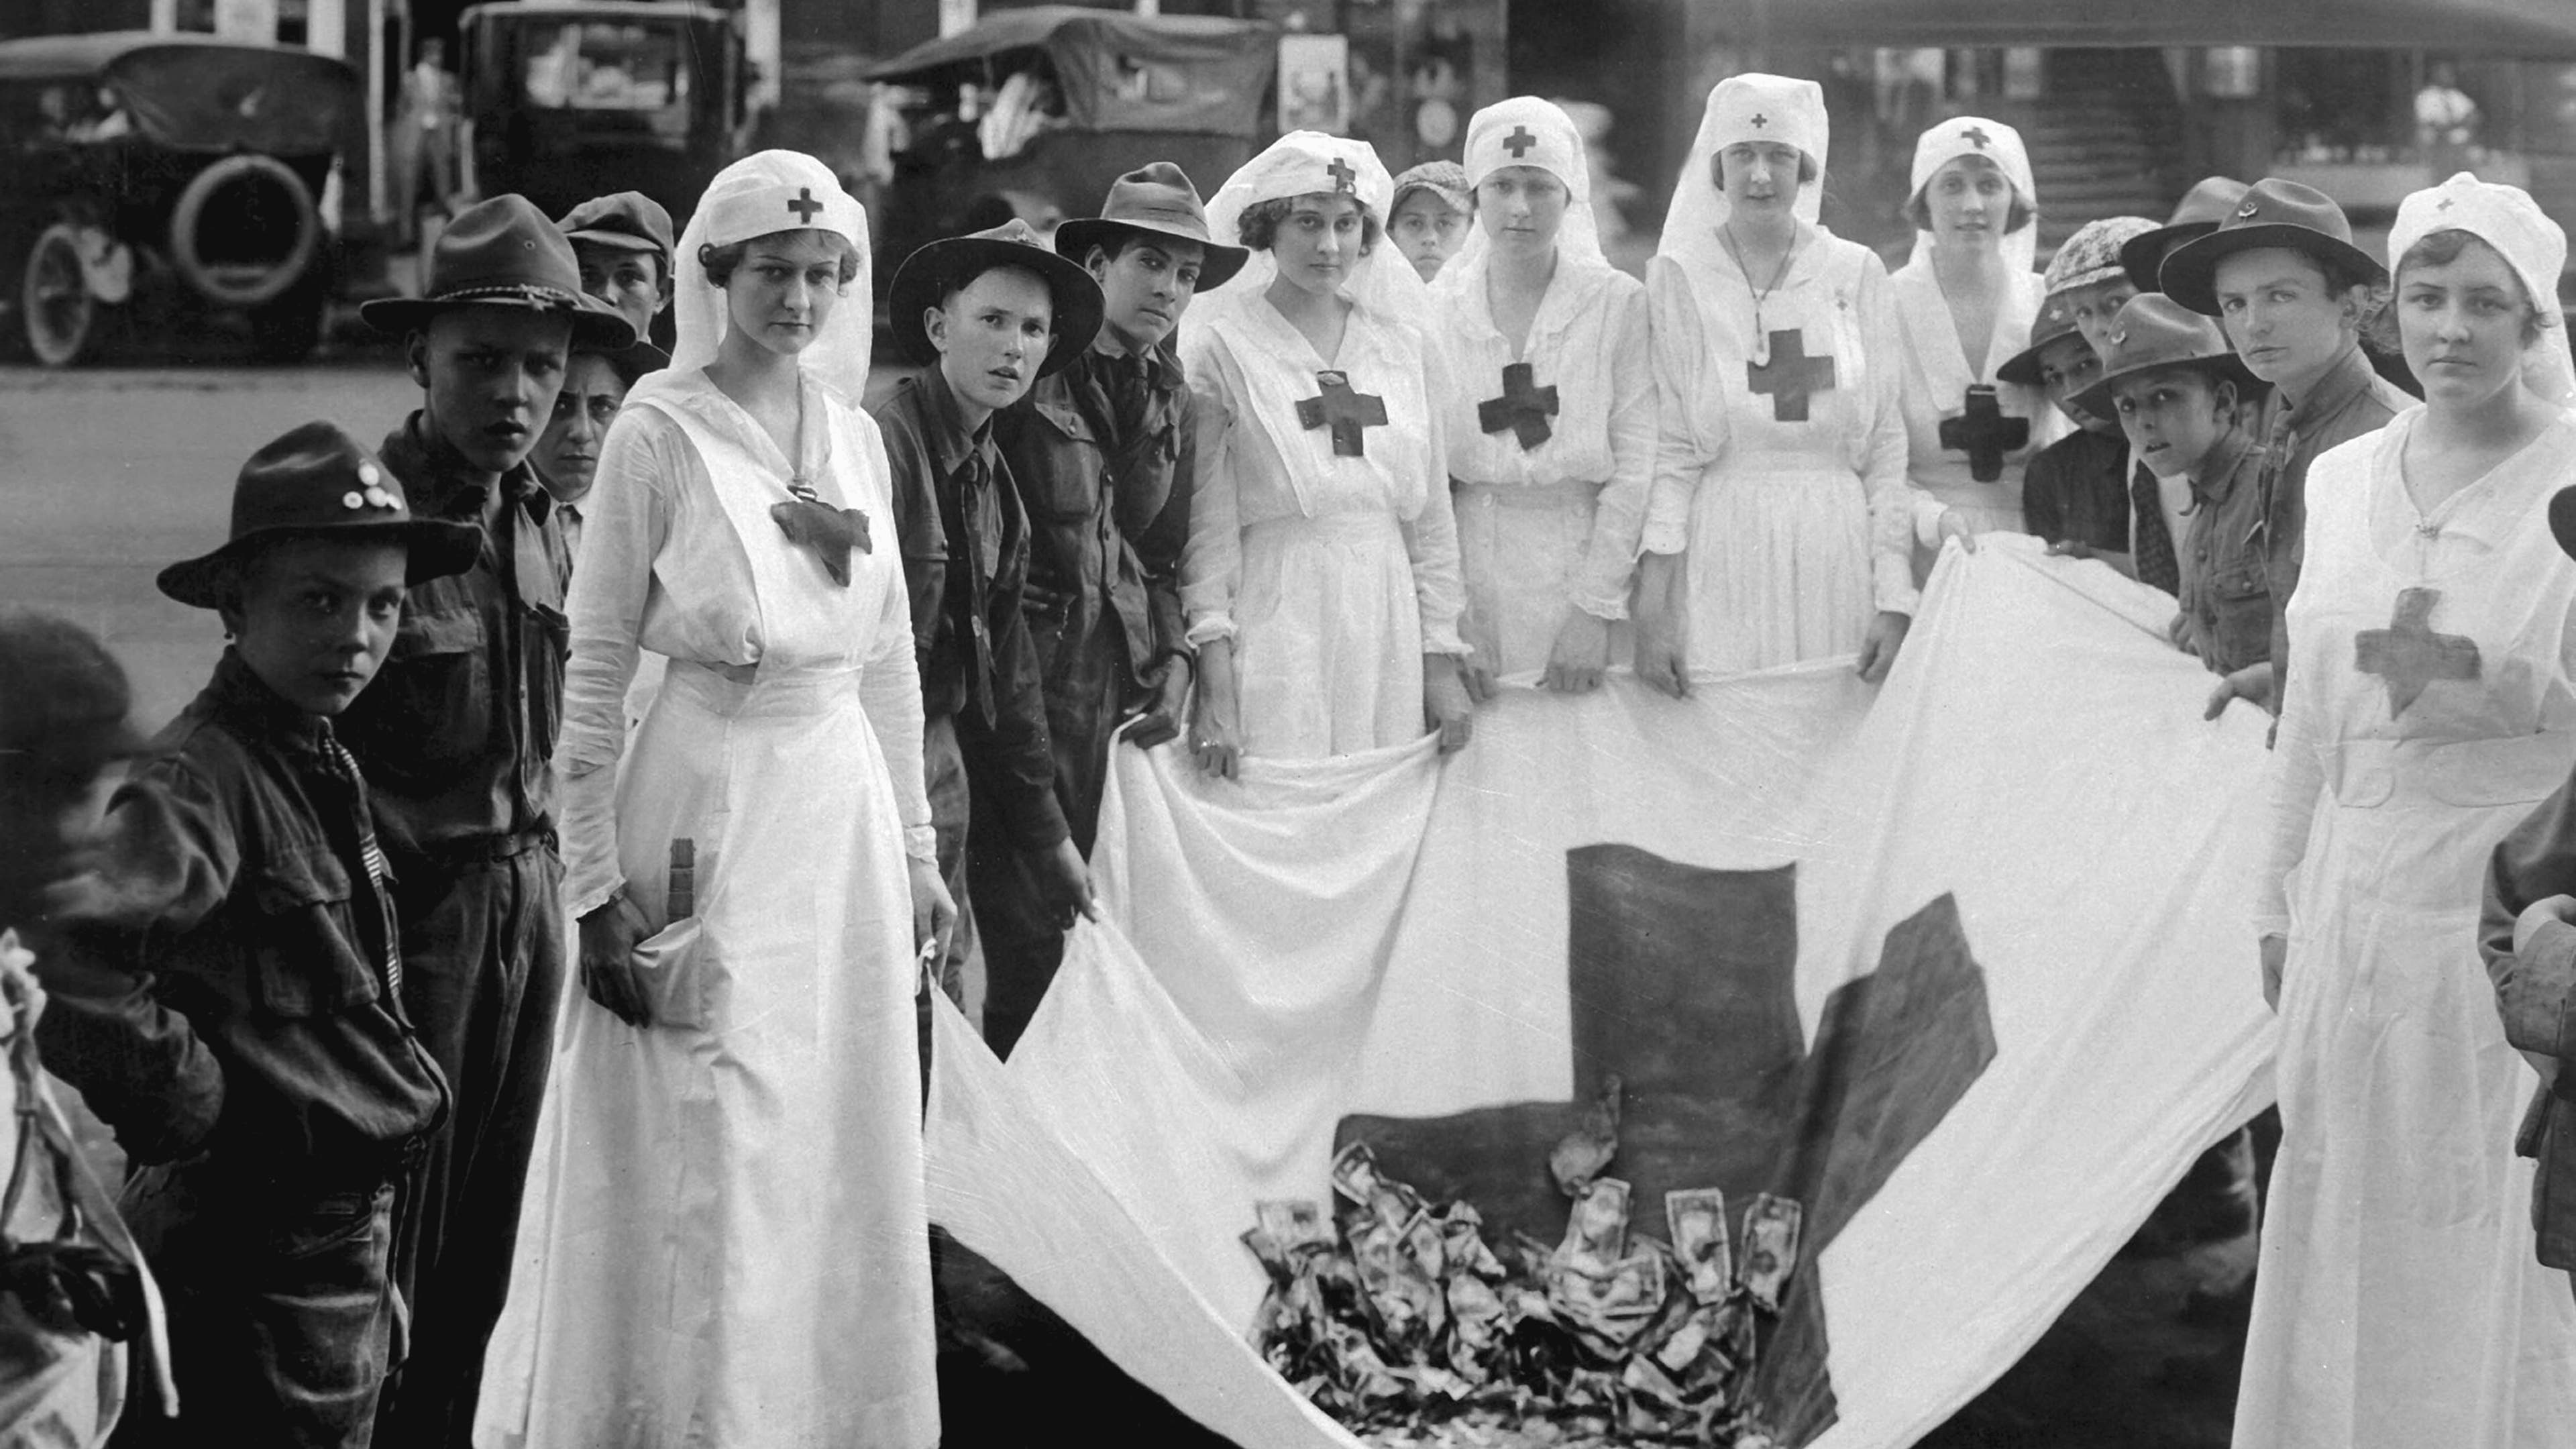 Group portrait of female American Red Cross workers with uniformed young boys (possibly boy scouts) with a Red Cross flag holding money, during a Red Cross parade, Birmingham, Alabama, May, 1918. US War Department photo.